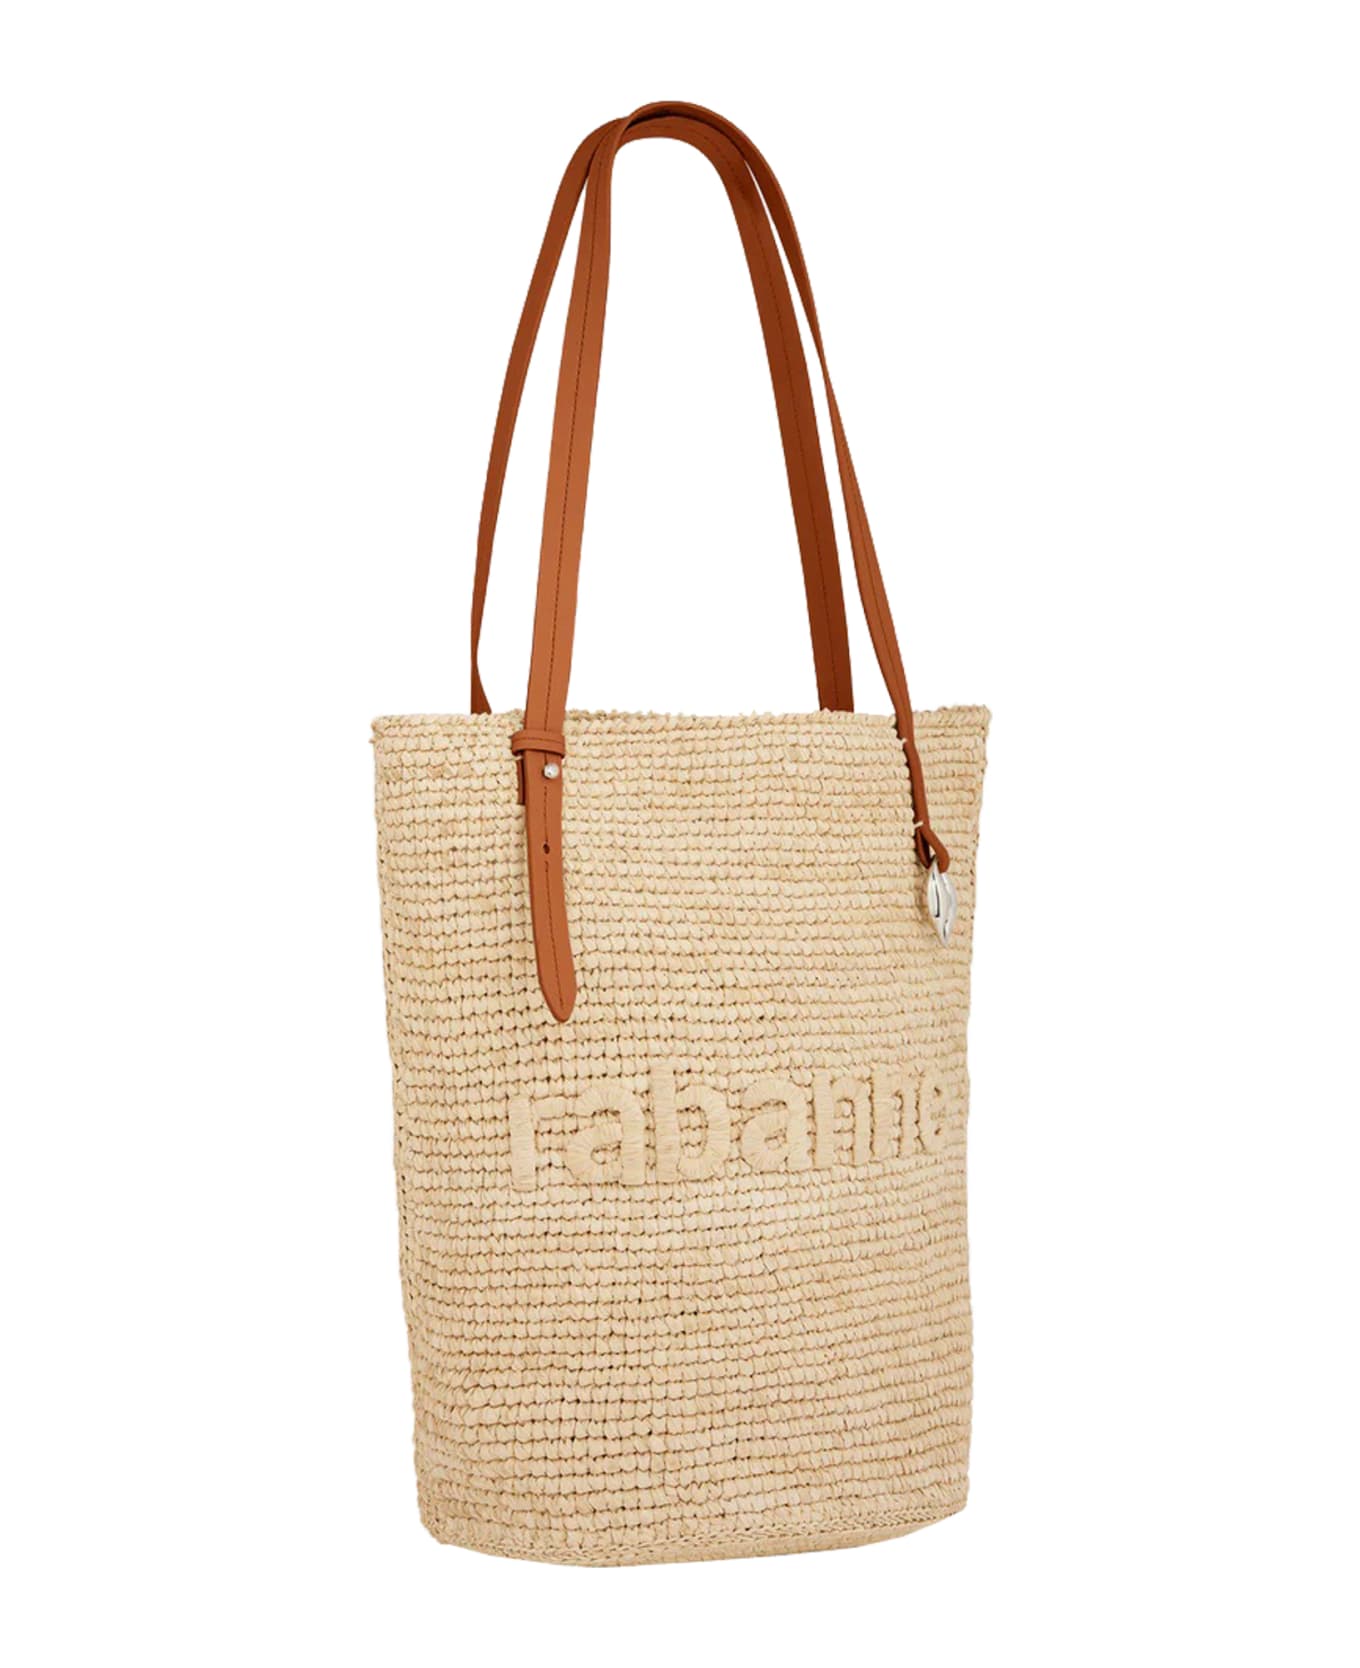 Paco Rabanne Logo Embroidered Woven Bucket Bag - Shiny Beige トートバッグ